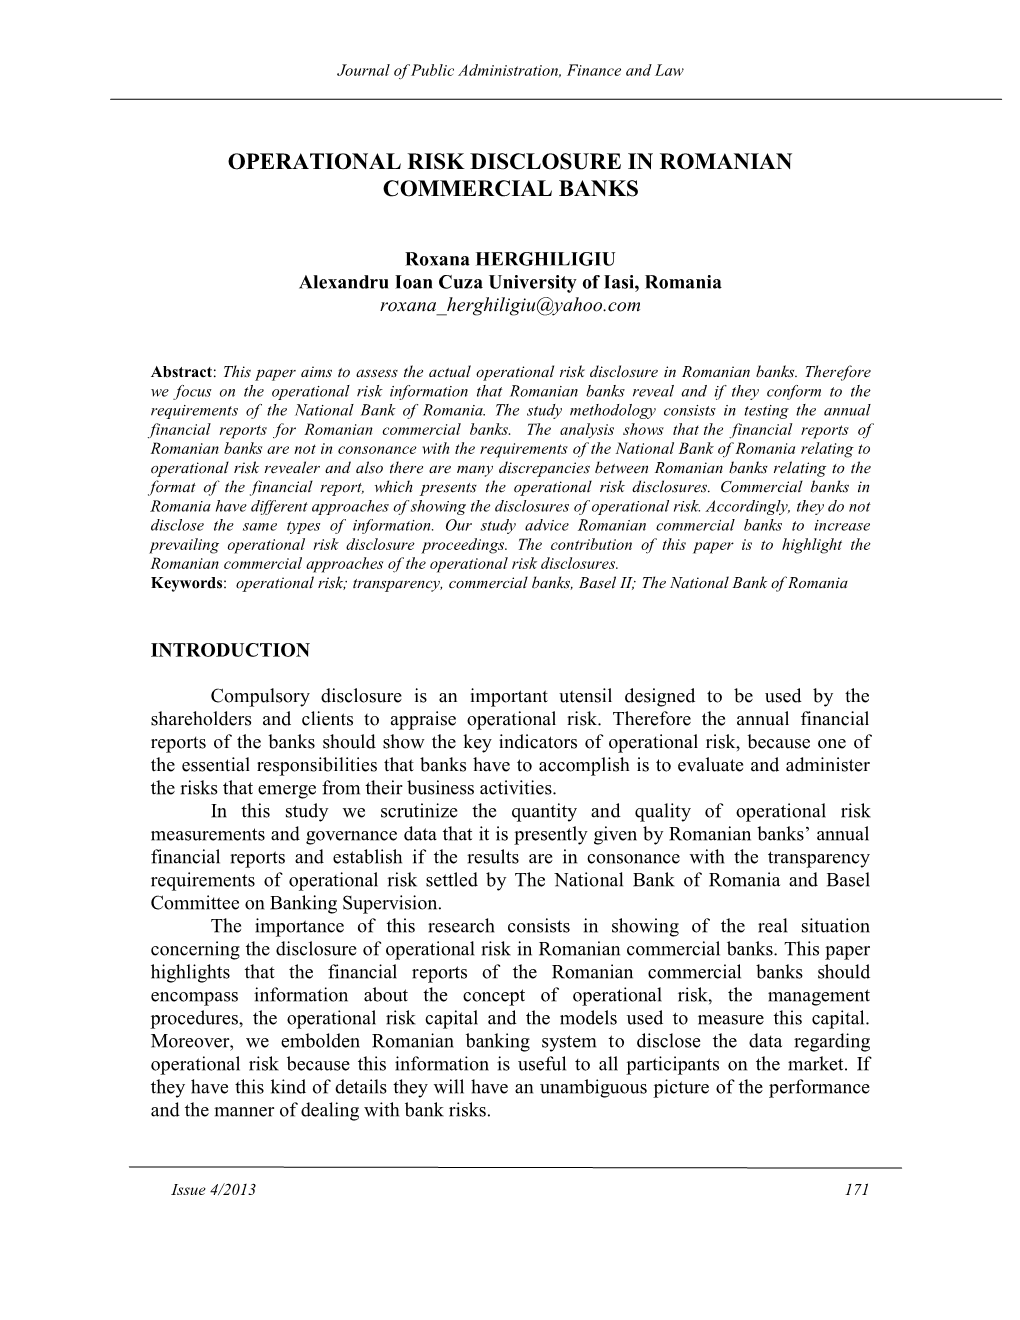 Operational Risk Disclosure in Romanian Commercial Banks